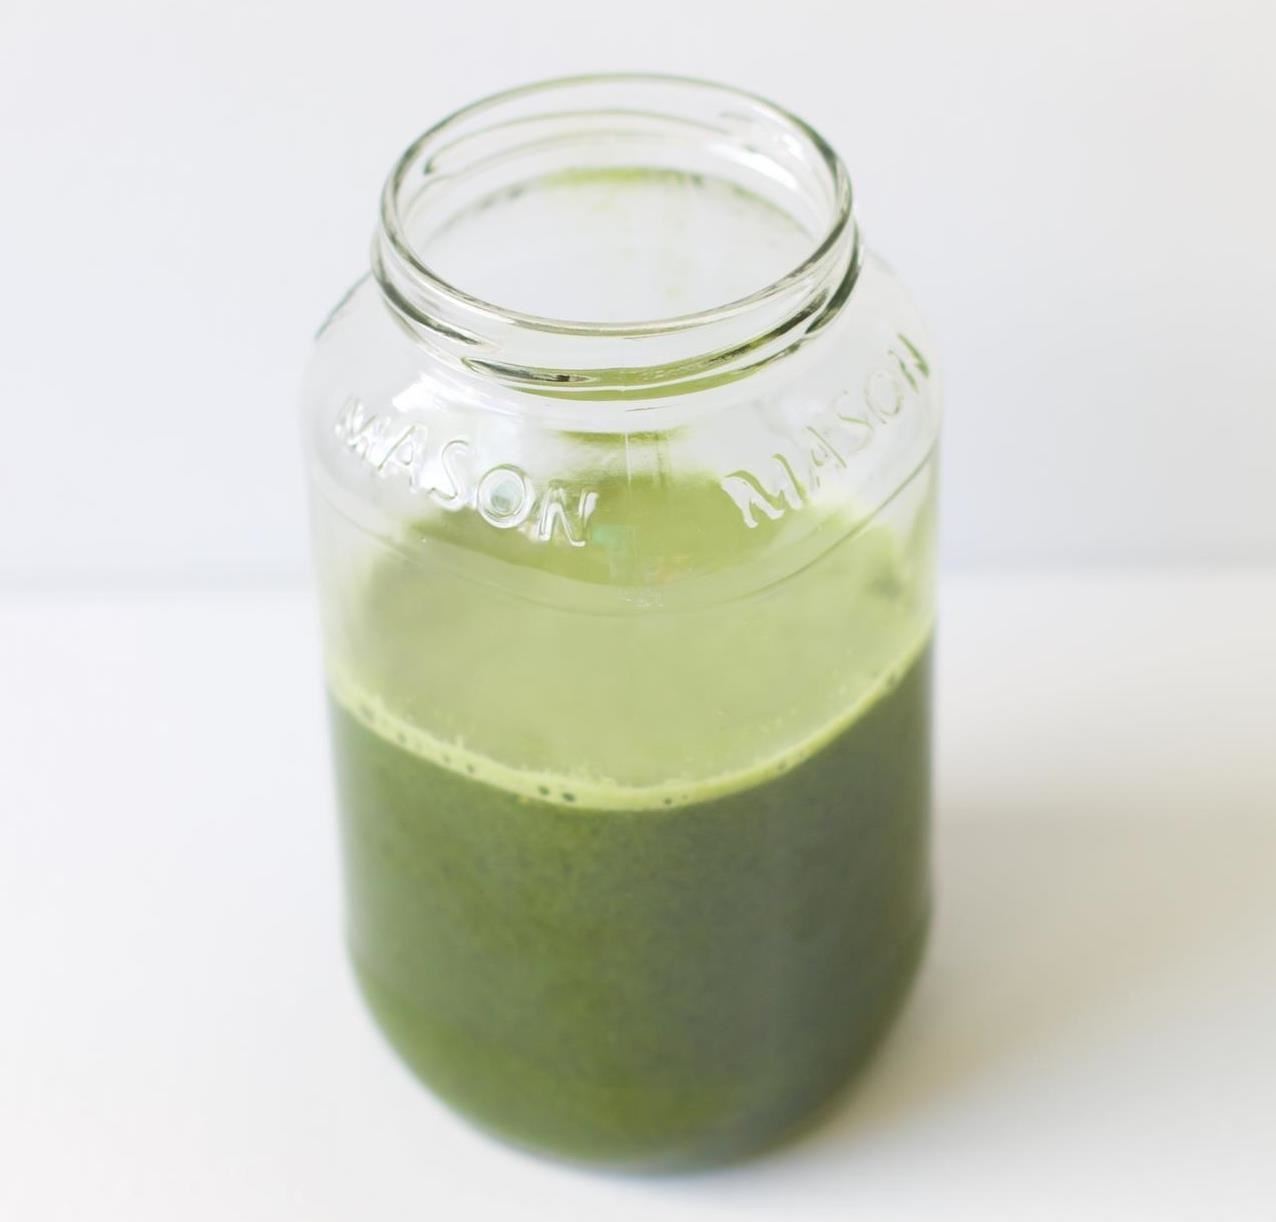 How to Make All-Natural Green Food Dye for St. Patrick's Day